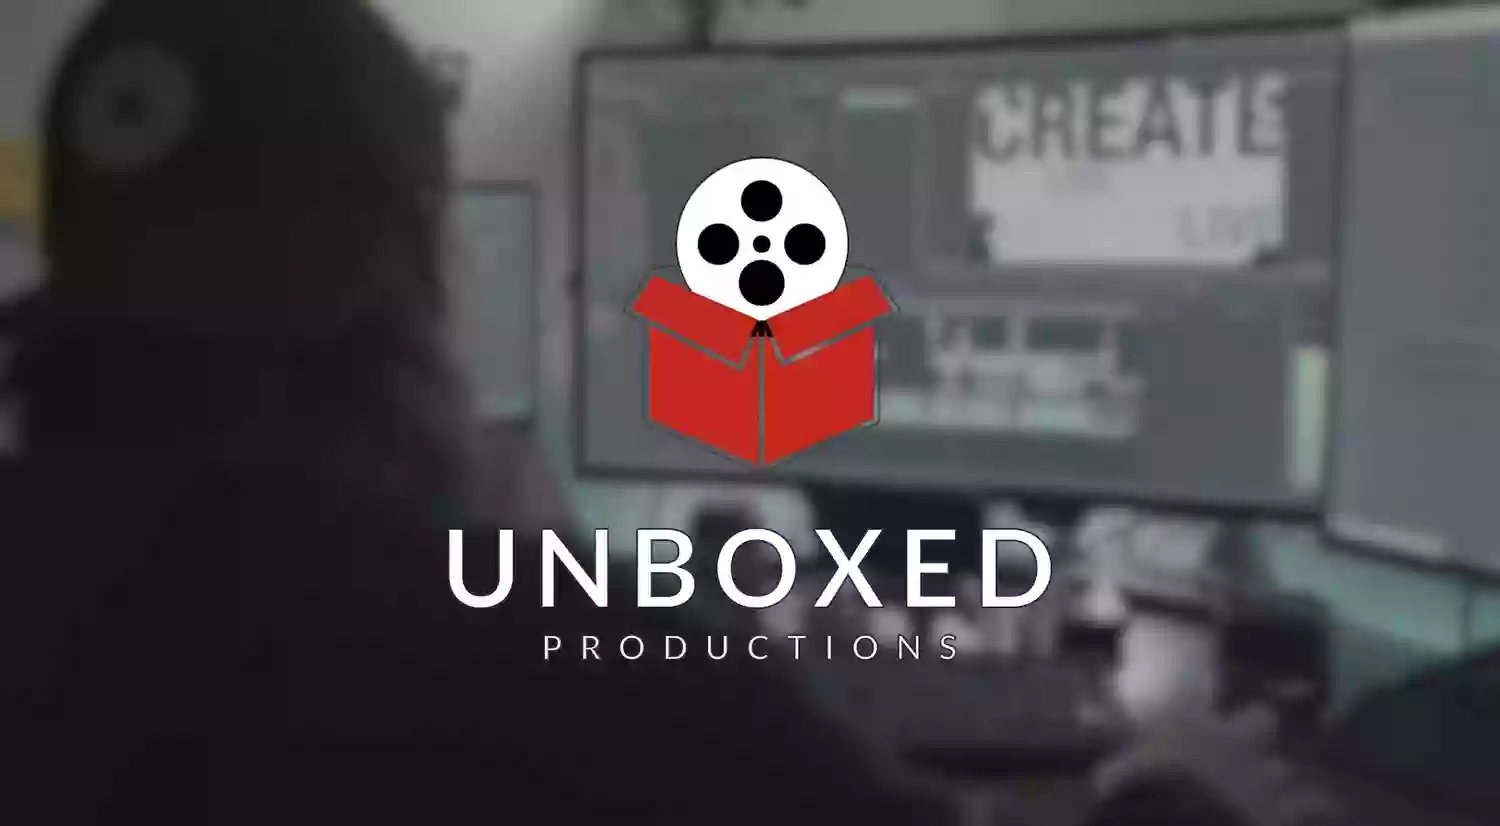 Unboxed Productions